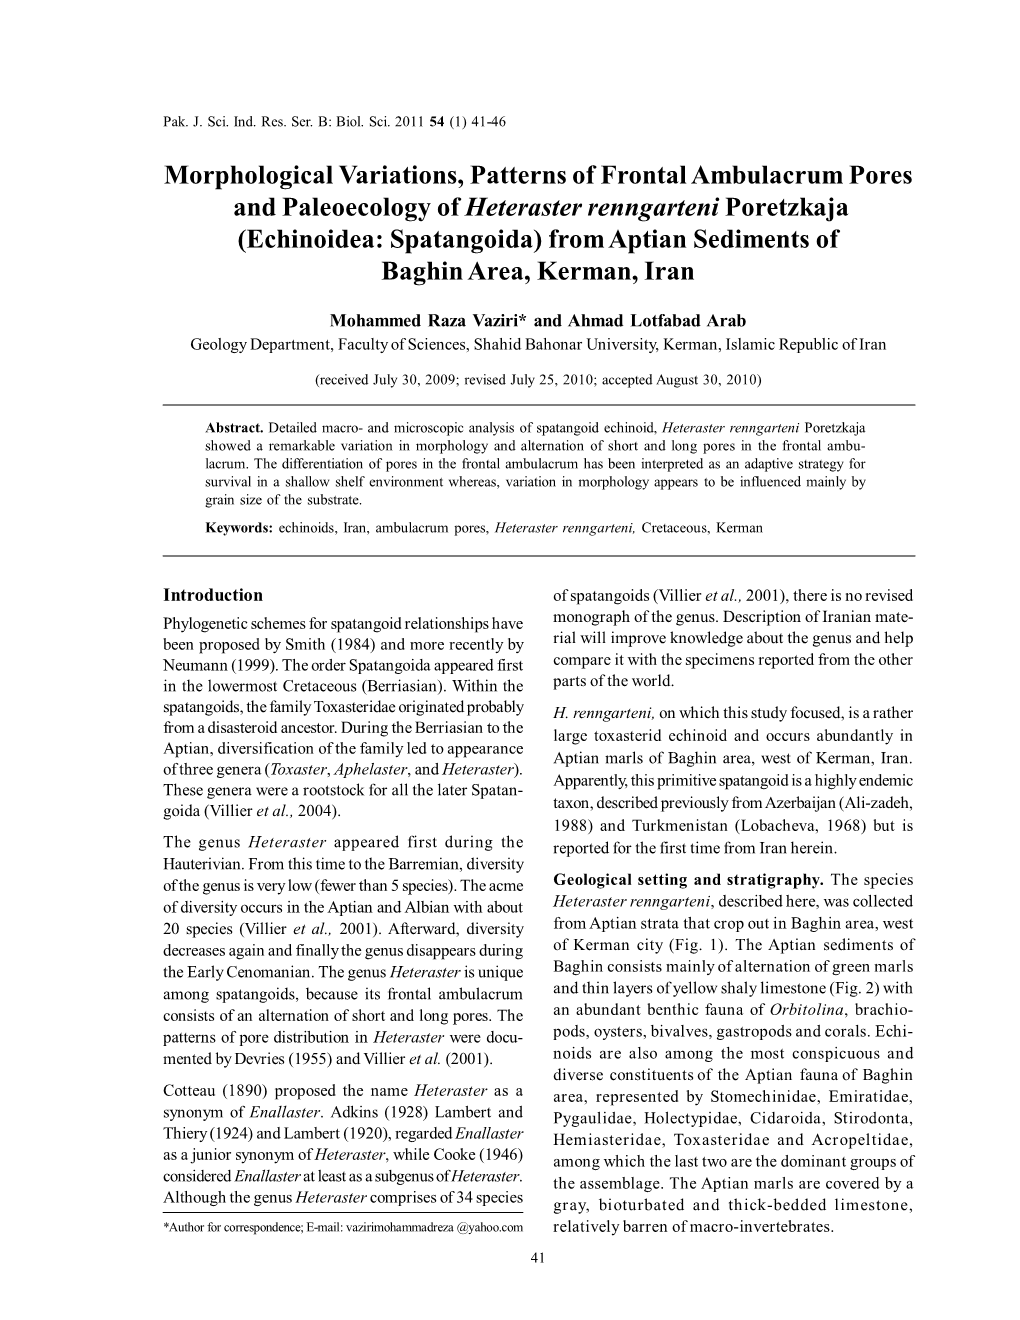 Morphological Variations, Patterns of Frontal Ambulacrum Pores And